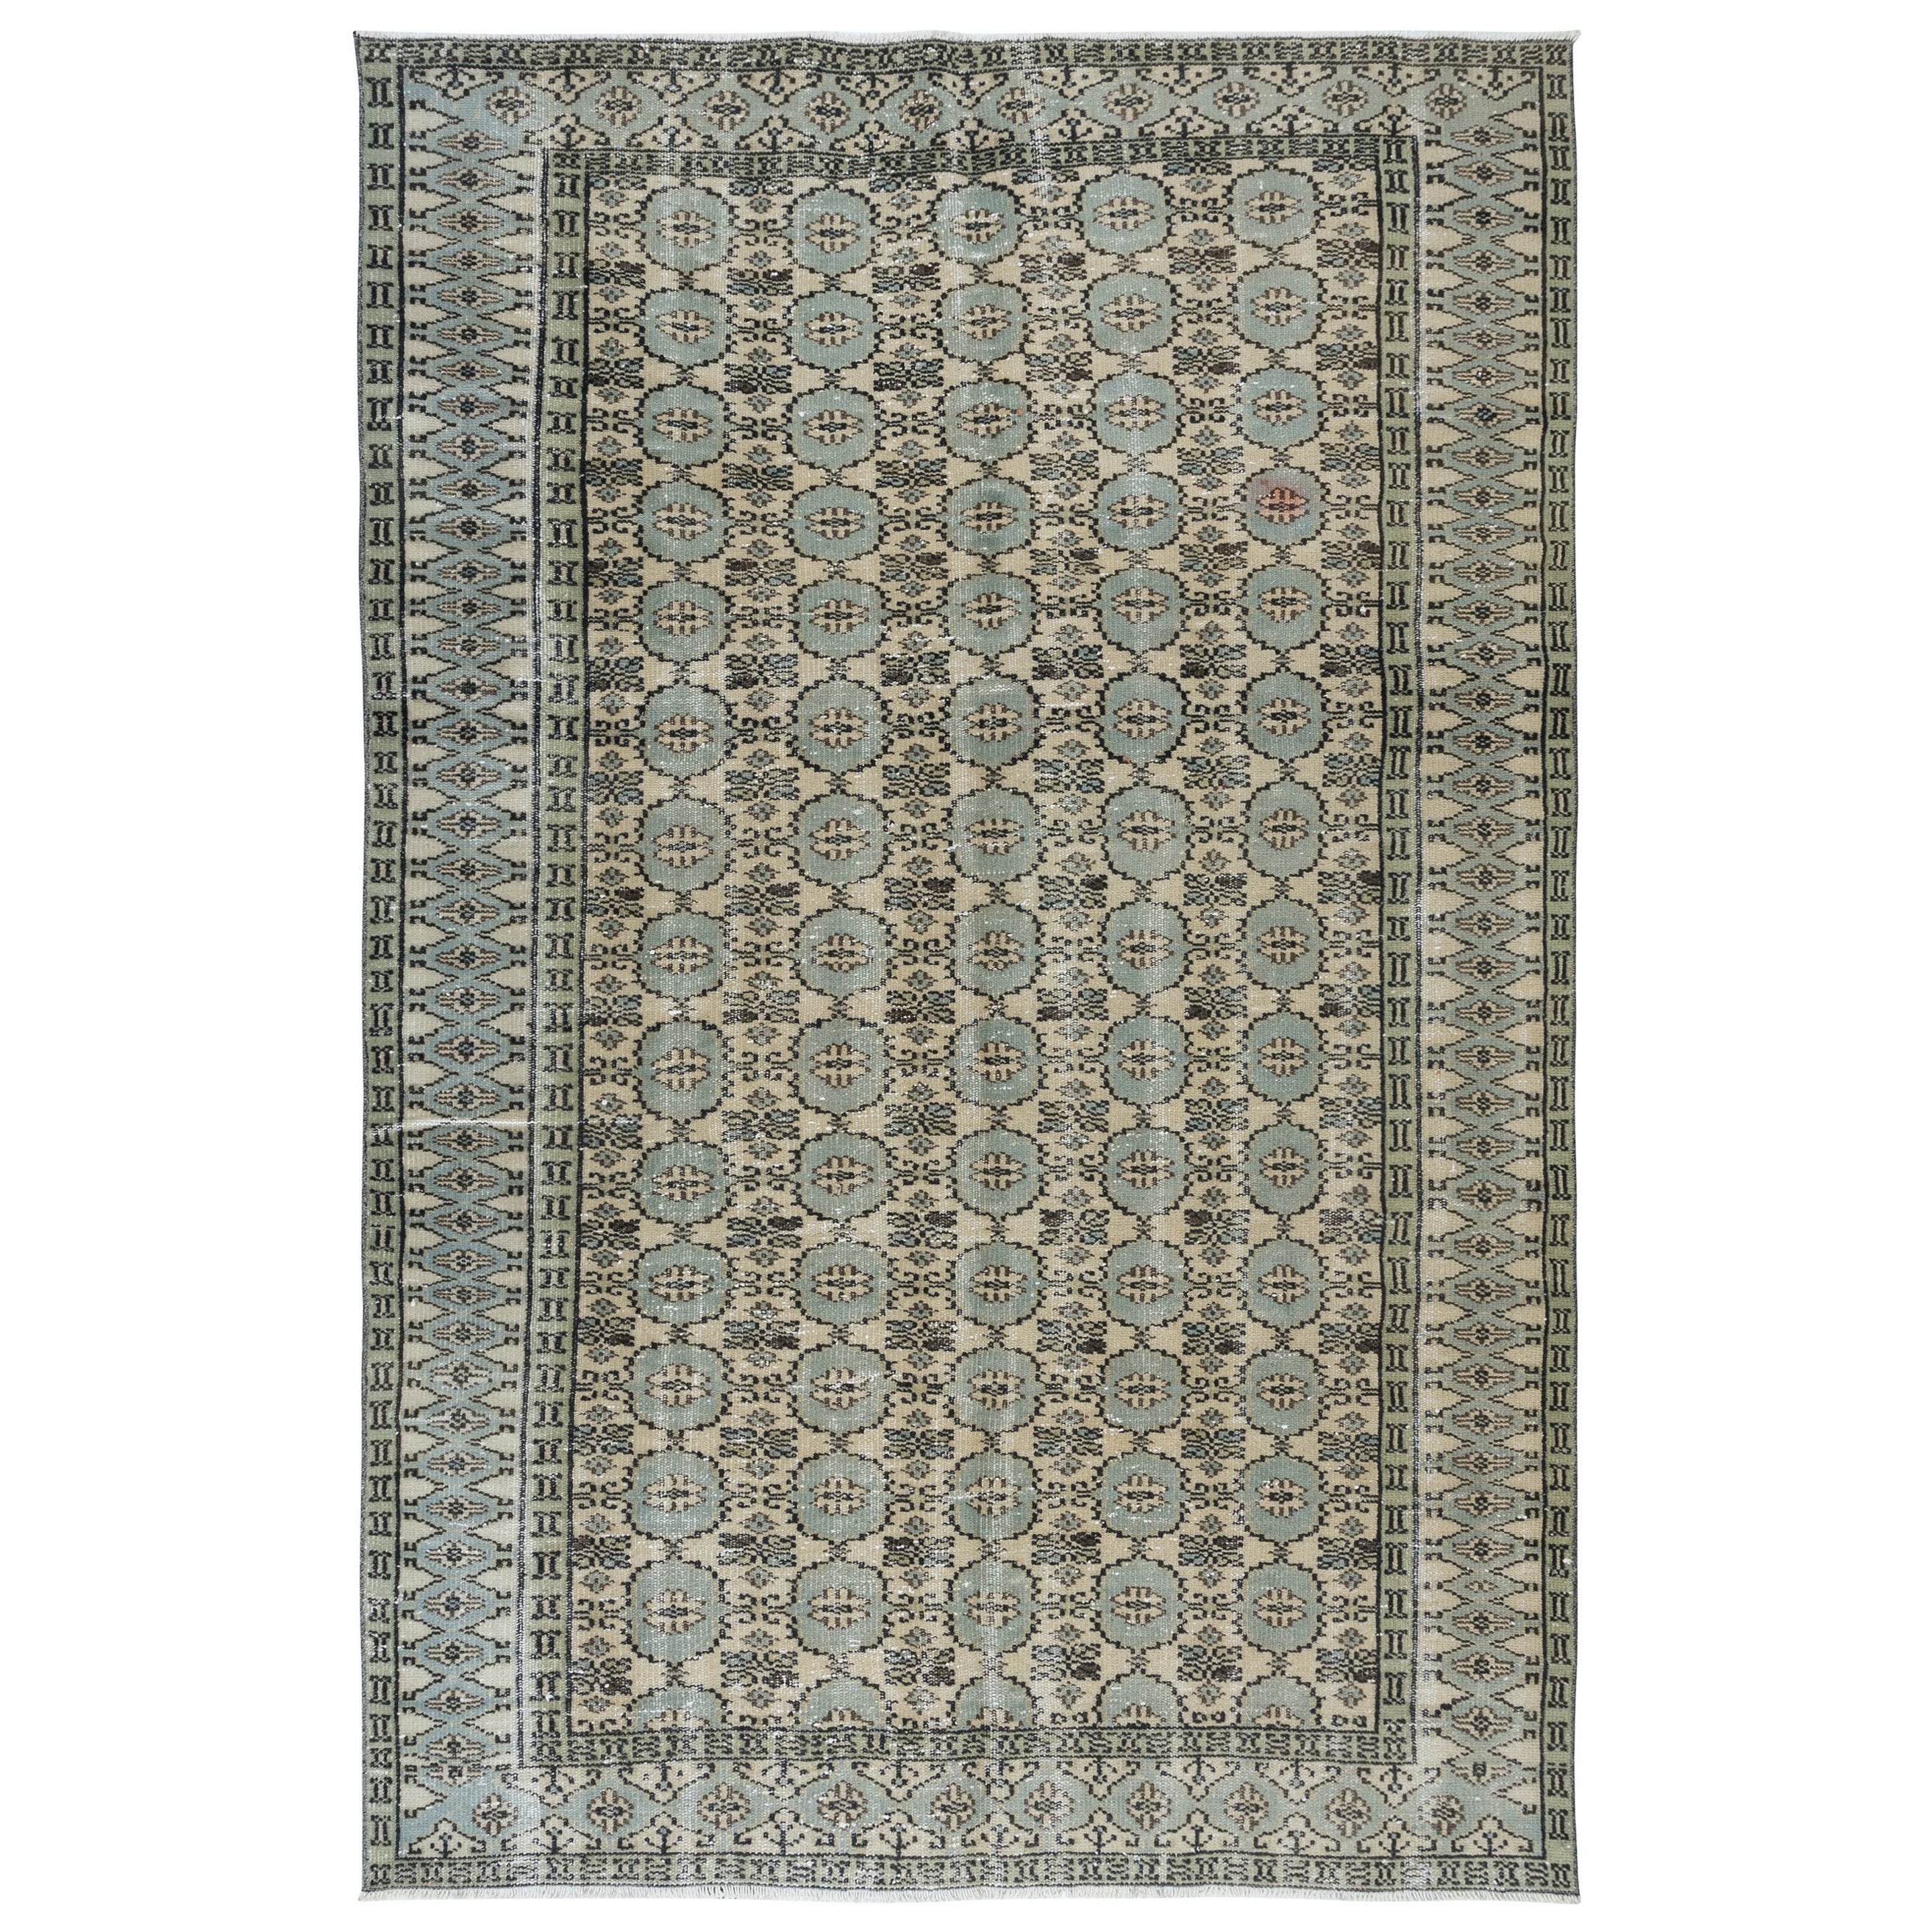 6x9 Ft Vintage Handmade Anatolian Oushak Rug for Country Home and Rustic Decor